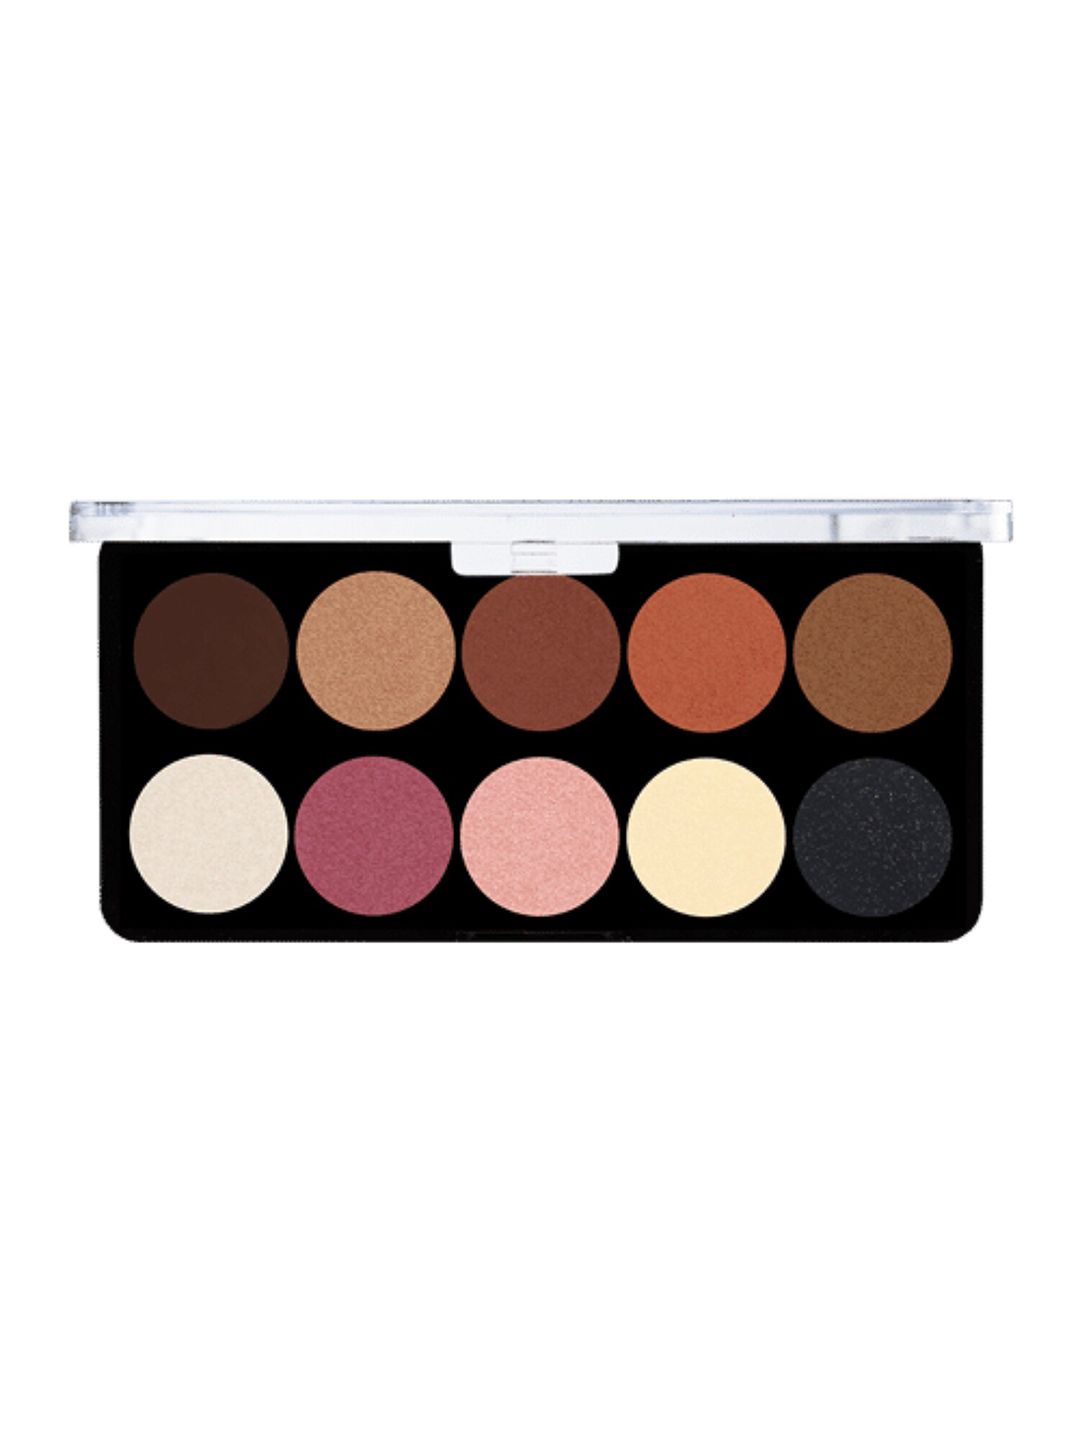 Sivanna Colors The Elegant Eye Shadow Palette - HF377 03 Price in India